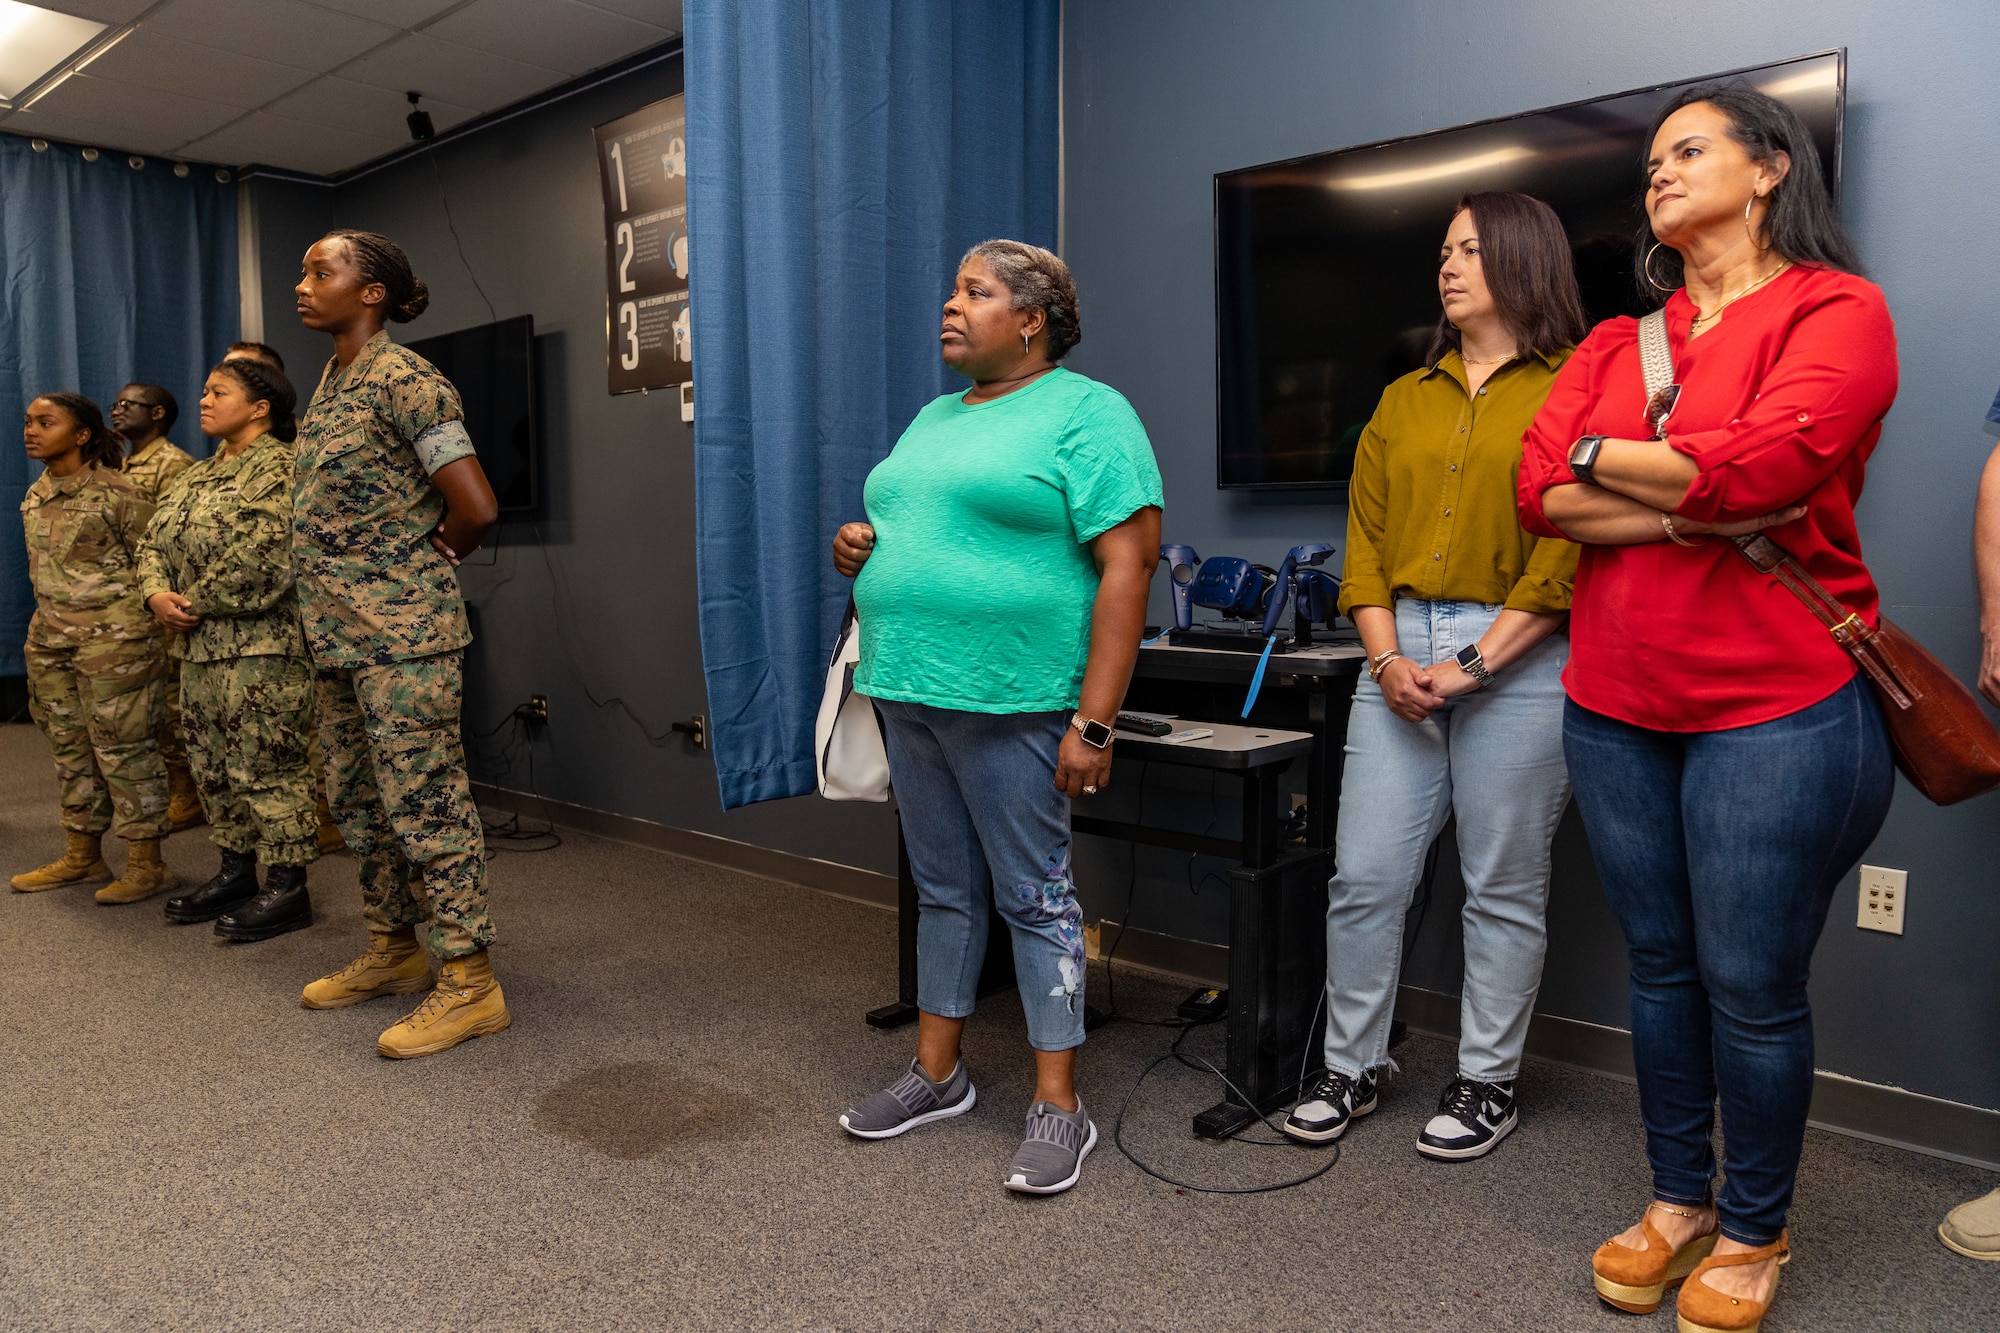 Delisa Brooks, Homewood High School career coach specialist, Adrienne Millet, West Jefferson High School assistant principal and Sonia Rivera, Enterprise High School science teacher, observe a class on weather at Keesler Air Force Base, Mississippi, Aug. 16, 2023.